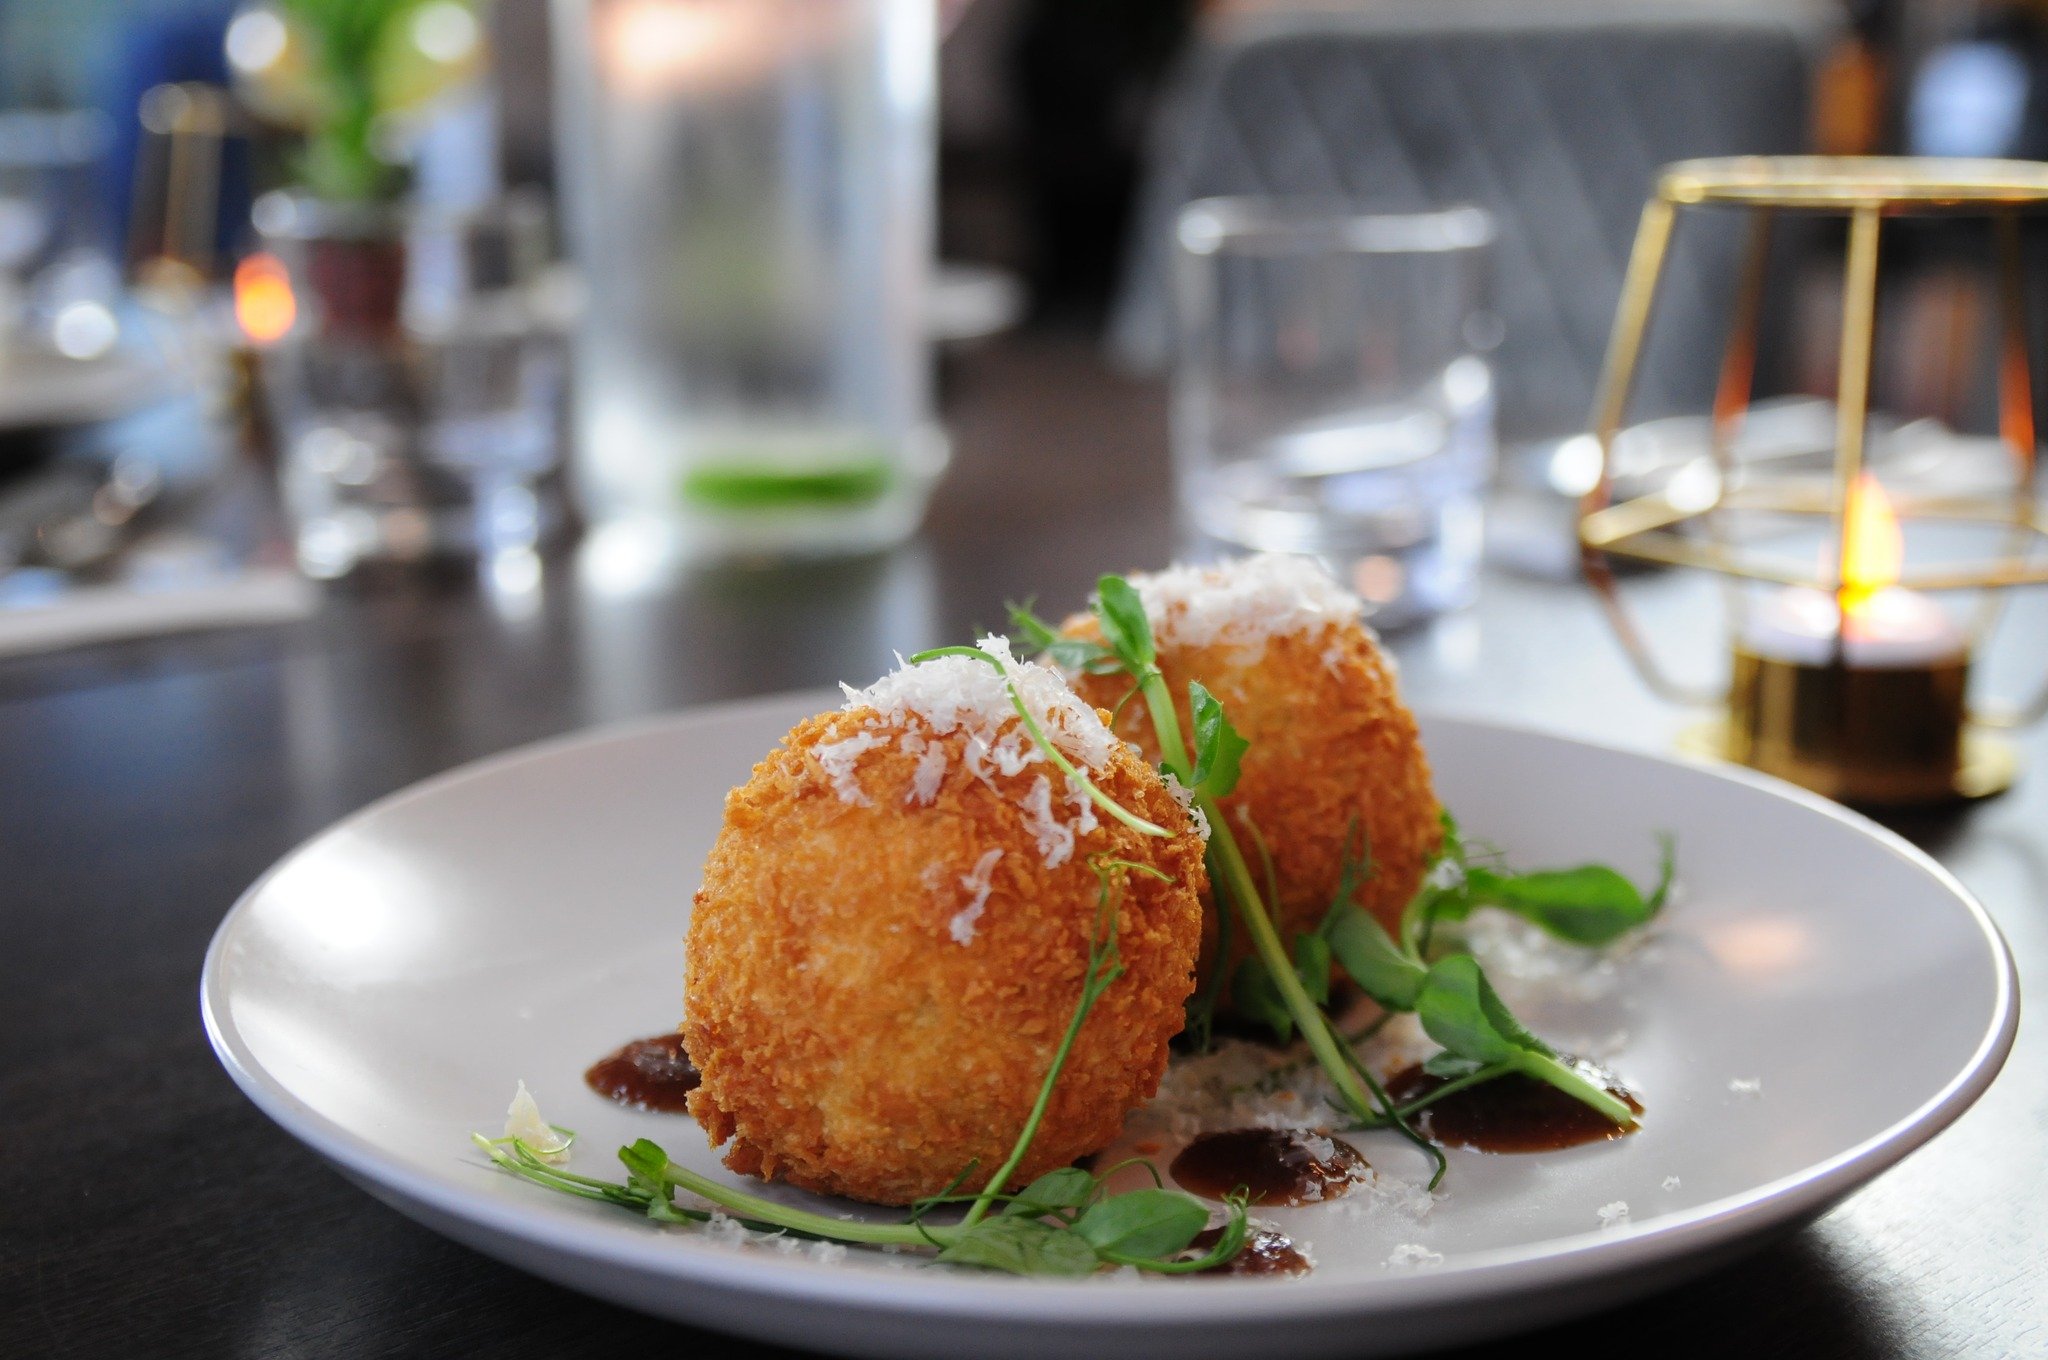 Transport yourself to the vibrant streets of Spain with our mouth-watering ham and cheese croquettes! 🇪🇸✨ This tapas classic is the perfect starter to cleanse the palate before the main event. Indulge in the crispy exterior and creamy, savoury fill